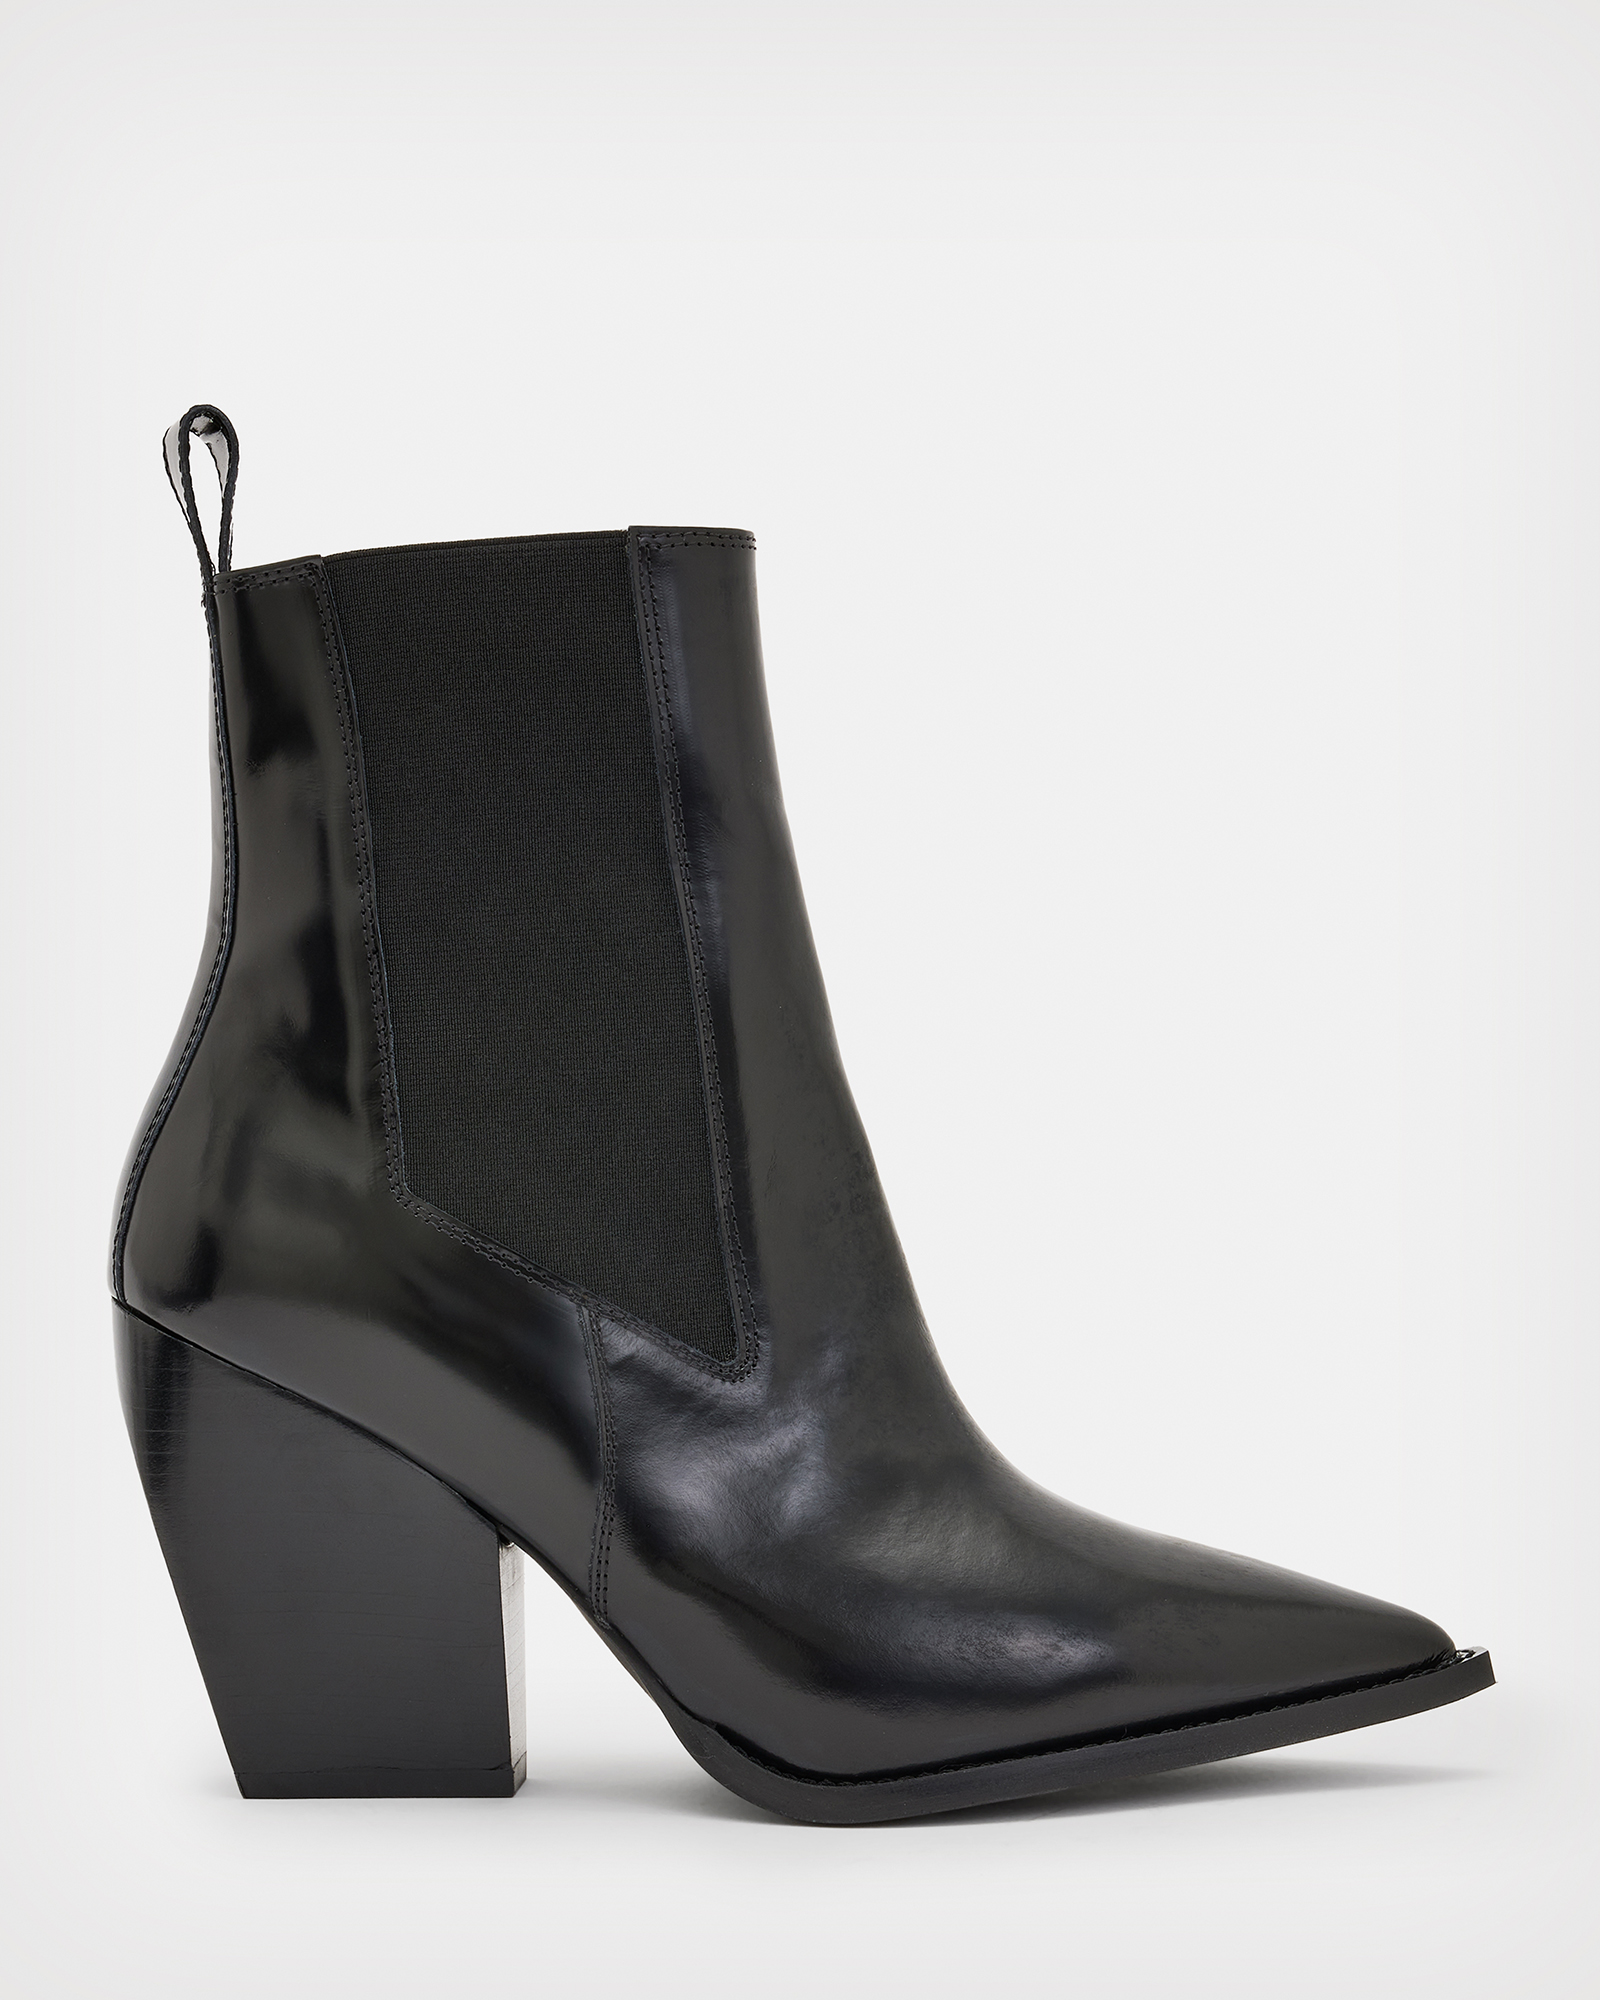 AllSaints Ria Pointed Leather Heeled Boots